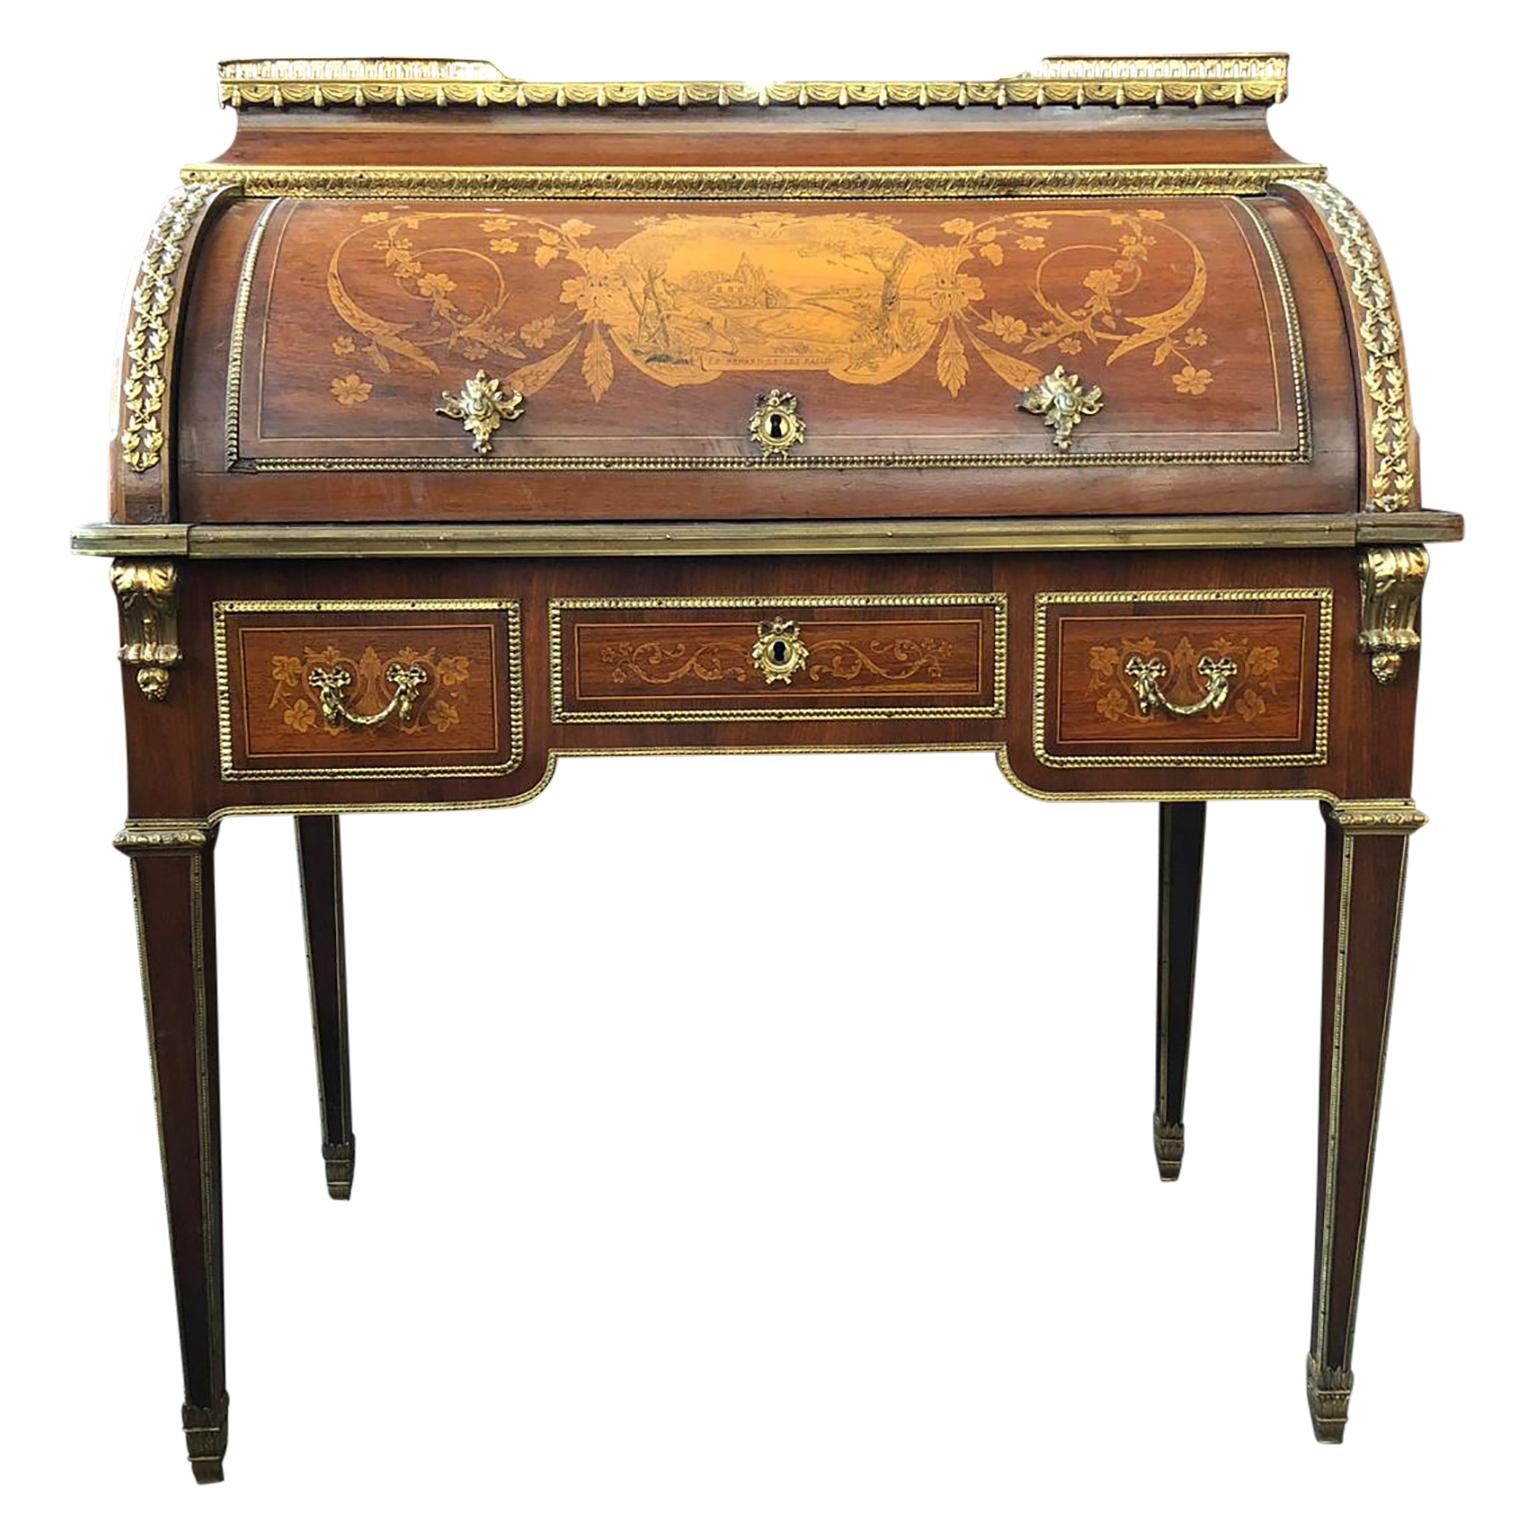 Wood Superior 19th Century French Louis XVI Style Parquetry/Marquetry Cylinder Desk